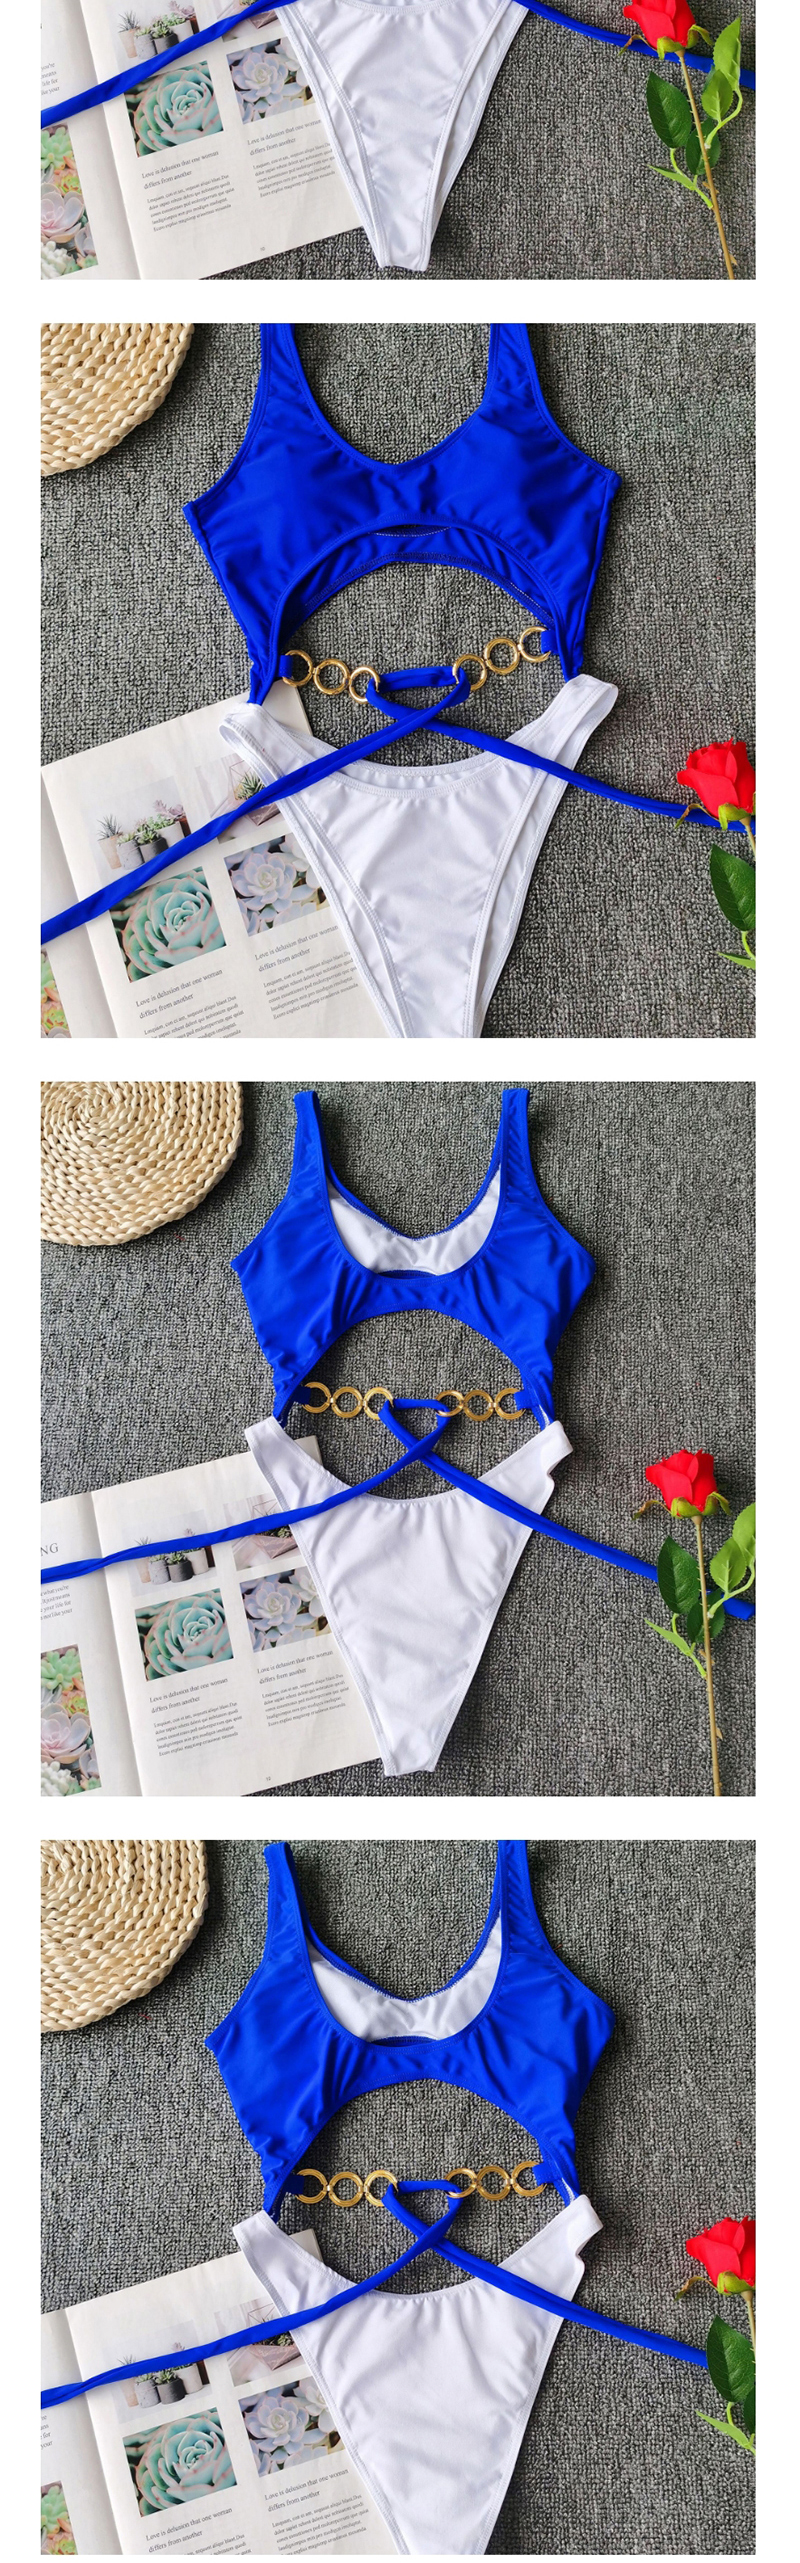 Fashion Colorful Metallic Ring Bow Stitching One-piece Swimsuit,One Pieces